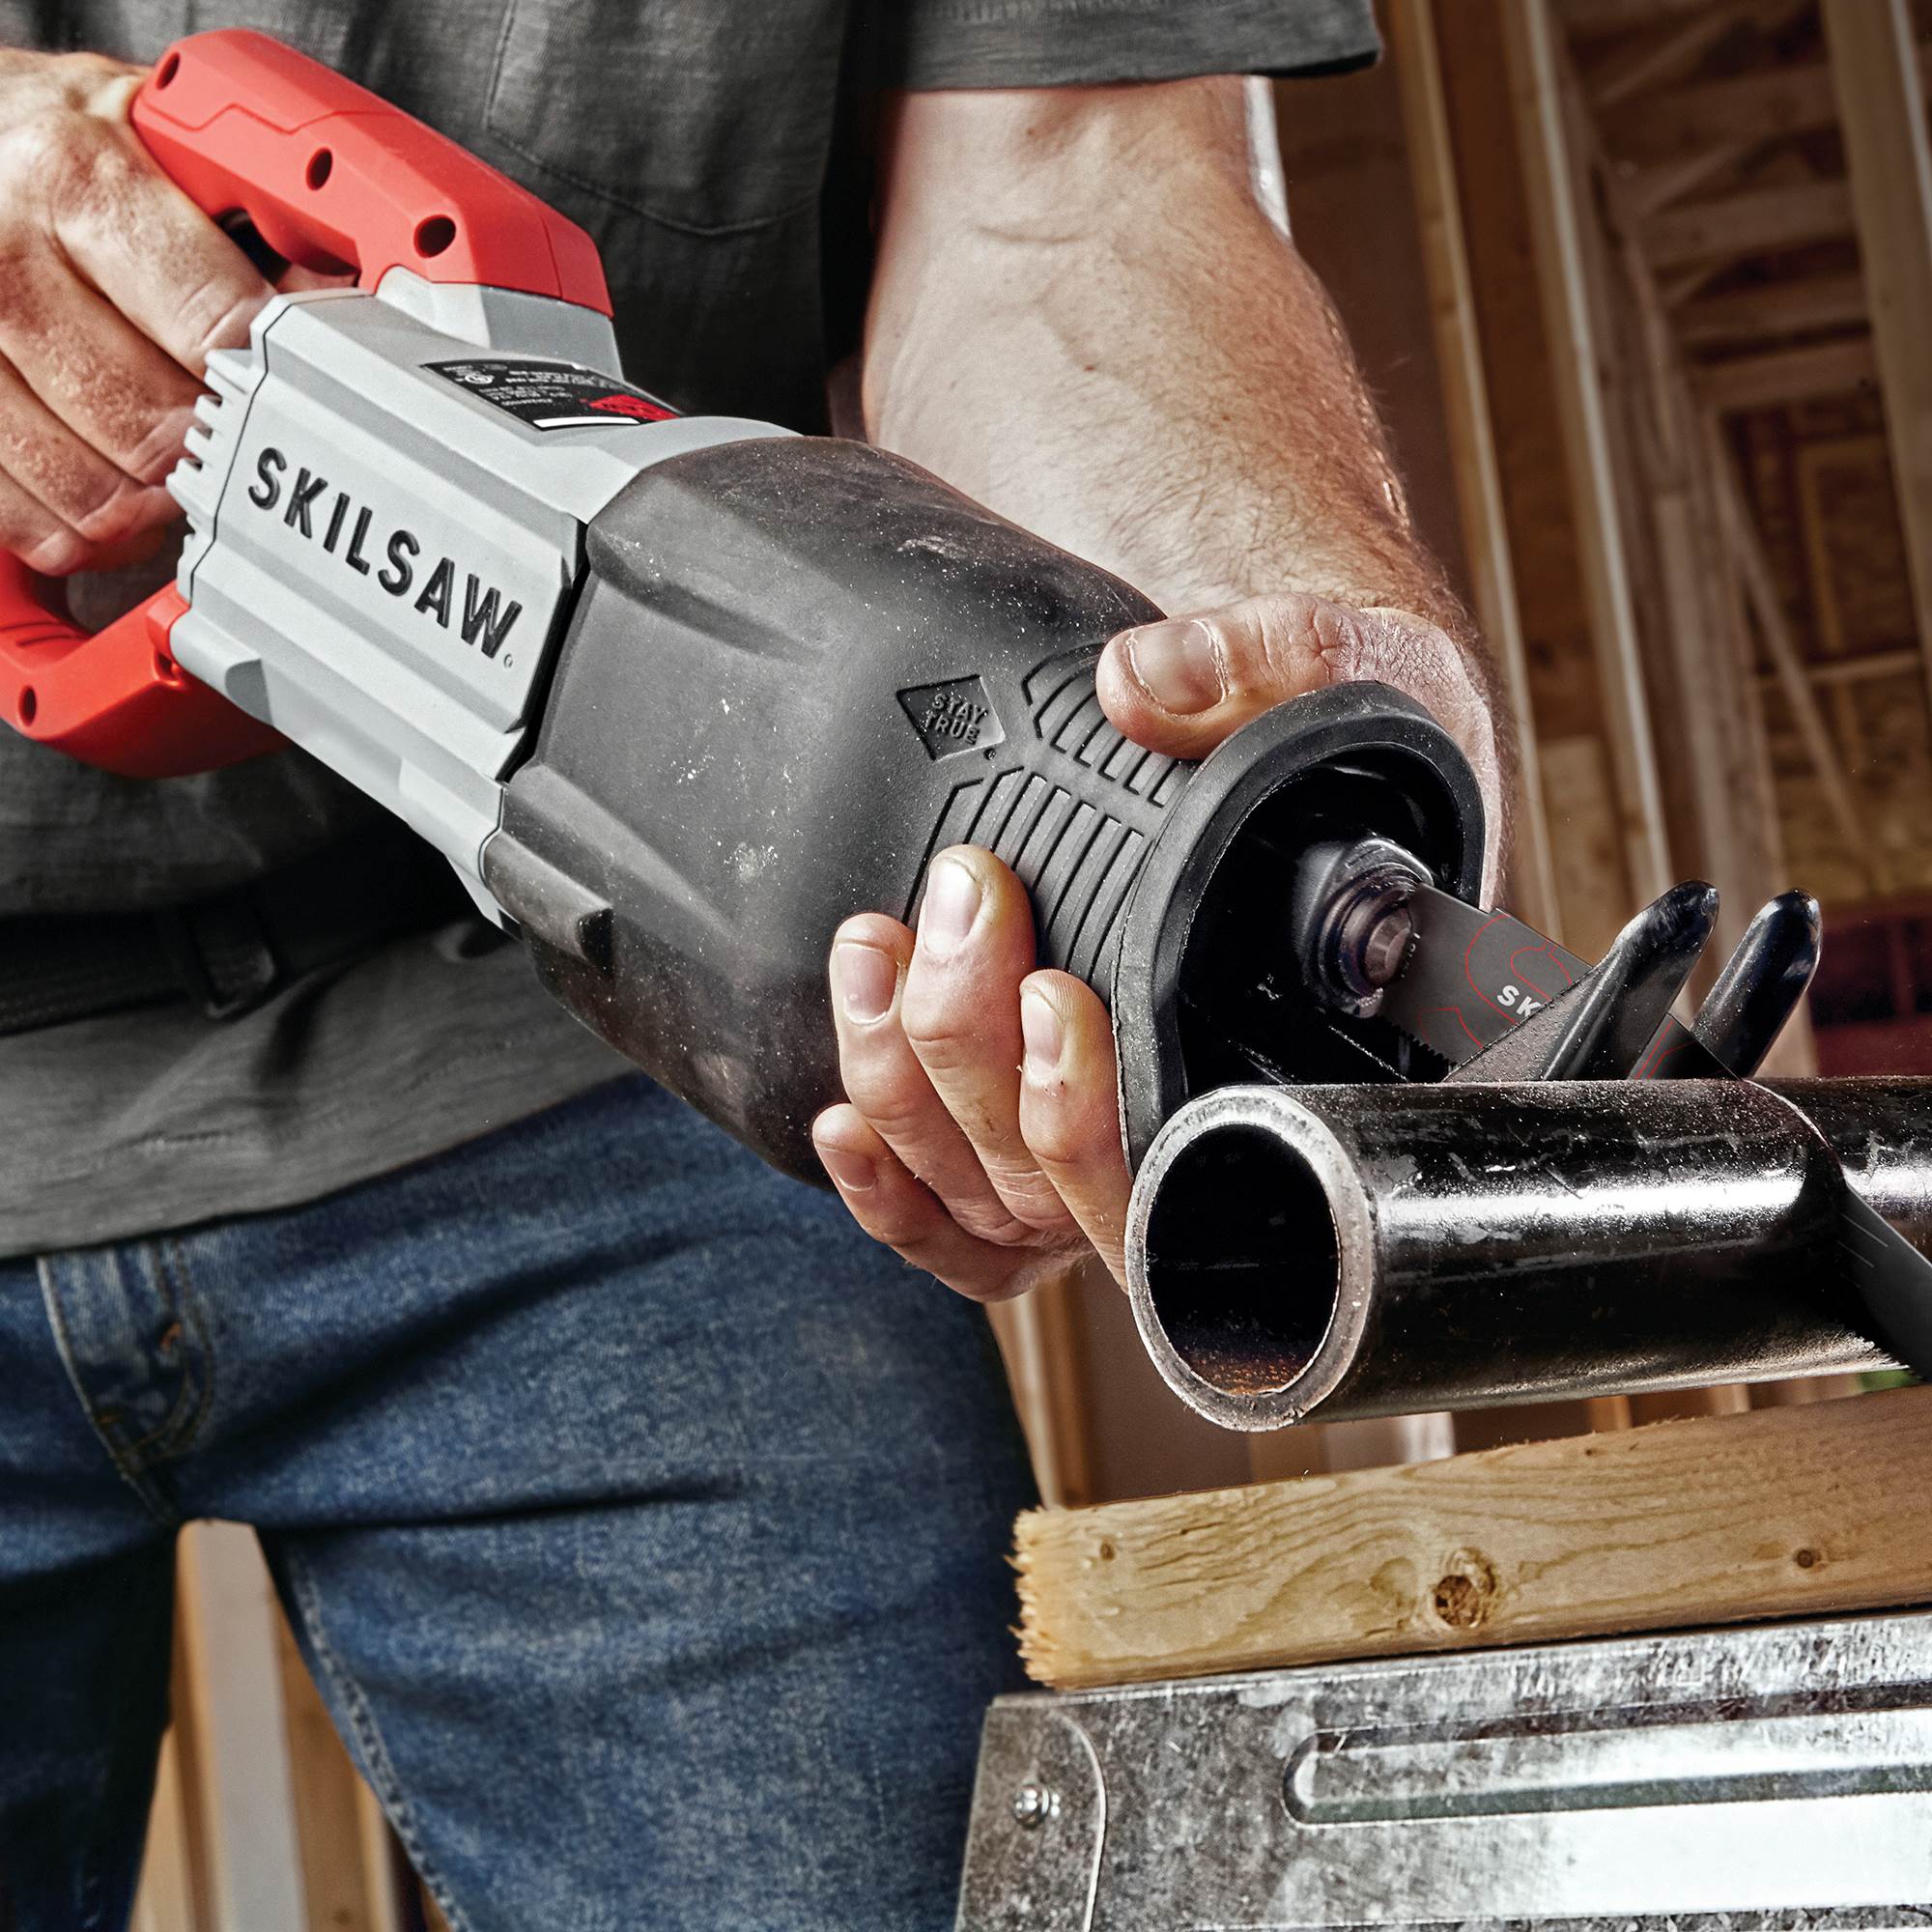 SKILSAW 13-Amp Reciprocating Saw with Buzzkill Technology, SPT44A-00 - image 4 of 8